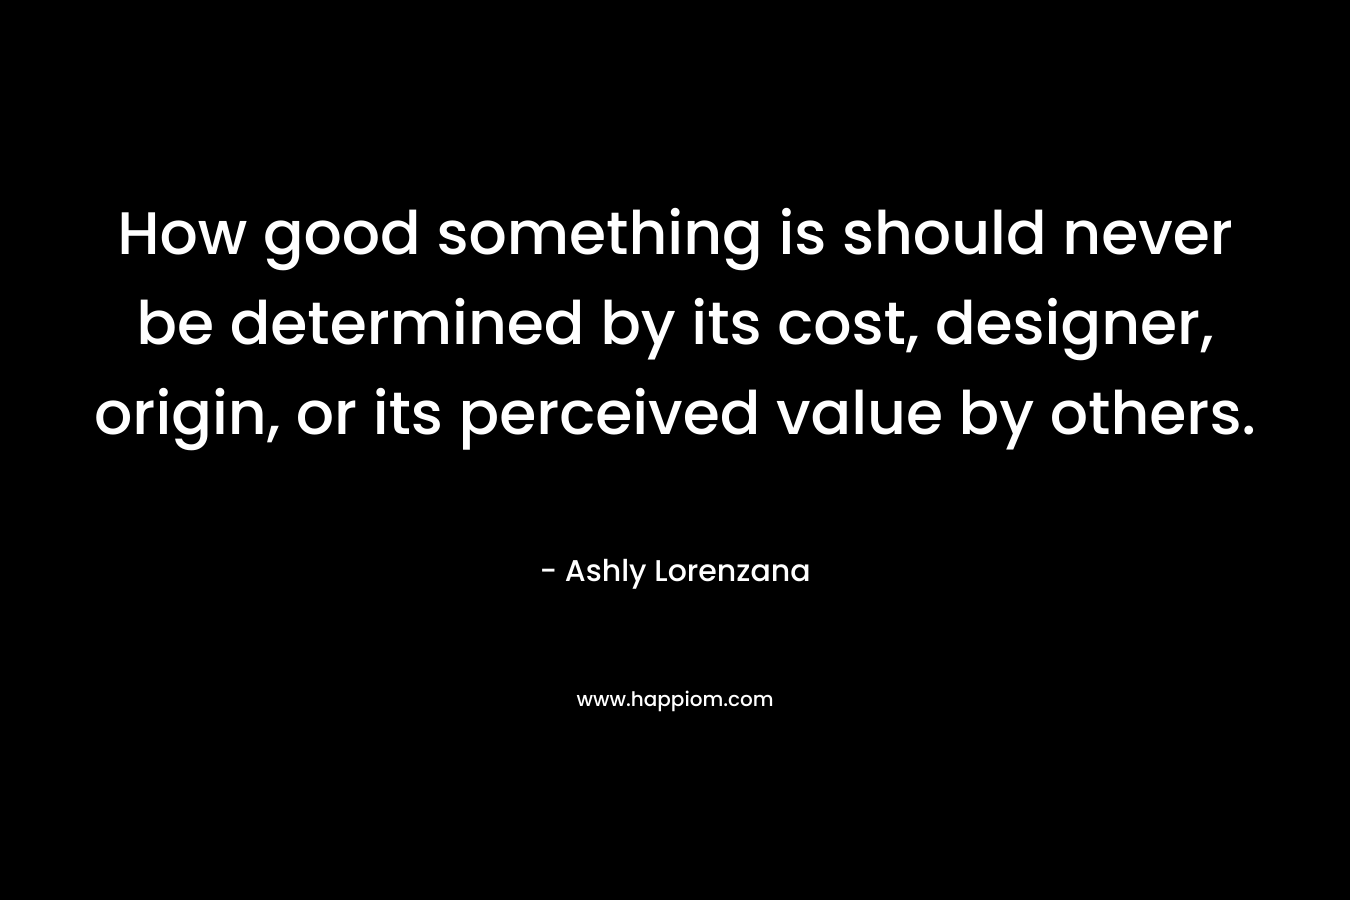 How good something is should never be determined by its cost, designer, origin, or its perceived value by others. – Ashly Lorenzana